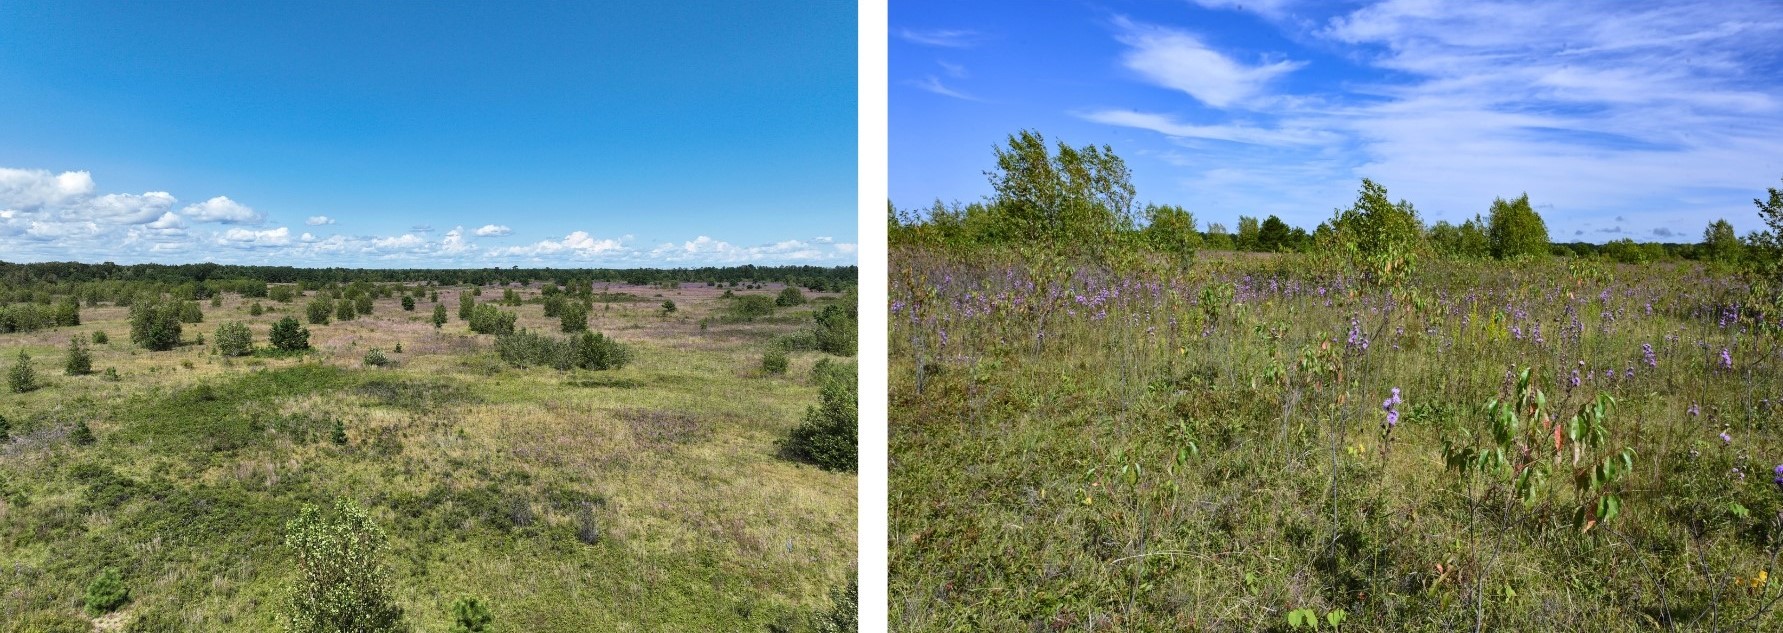 Two photos showing the regrowth of shrubby vegetation across a grassland two to three years after a prescribed burn.